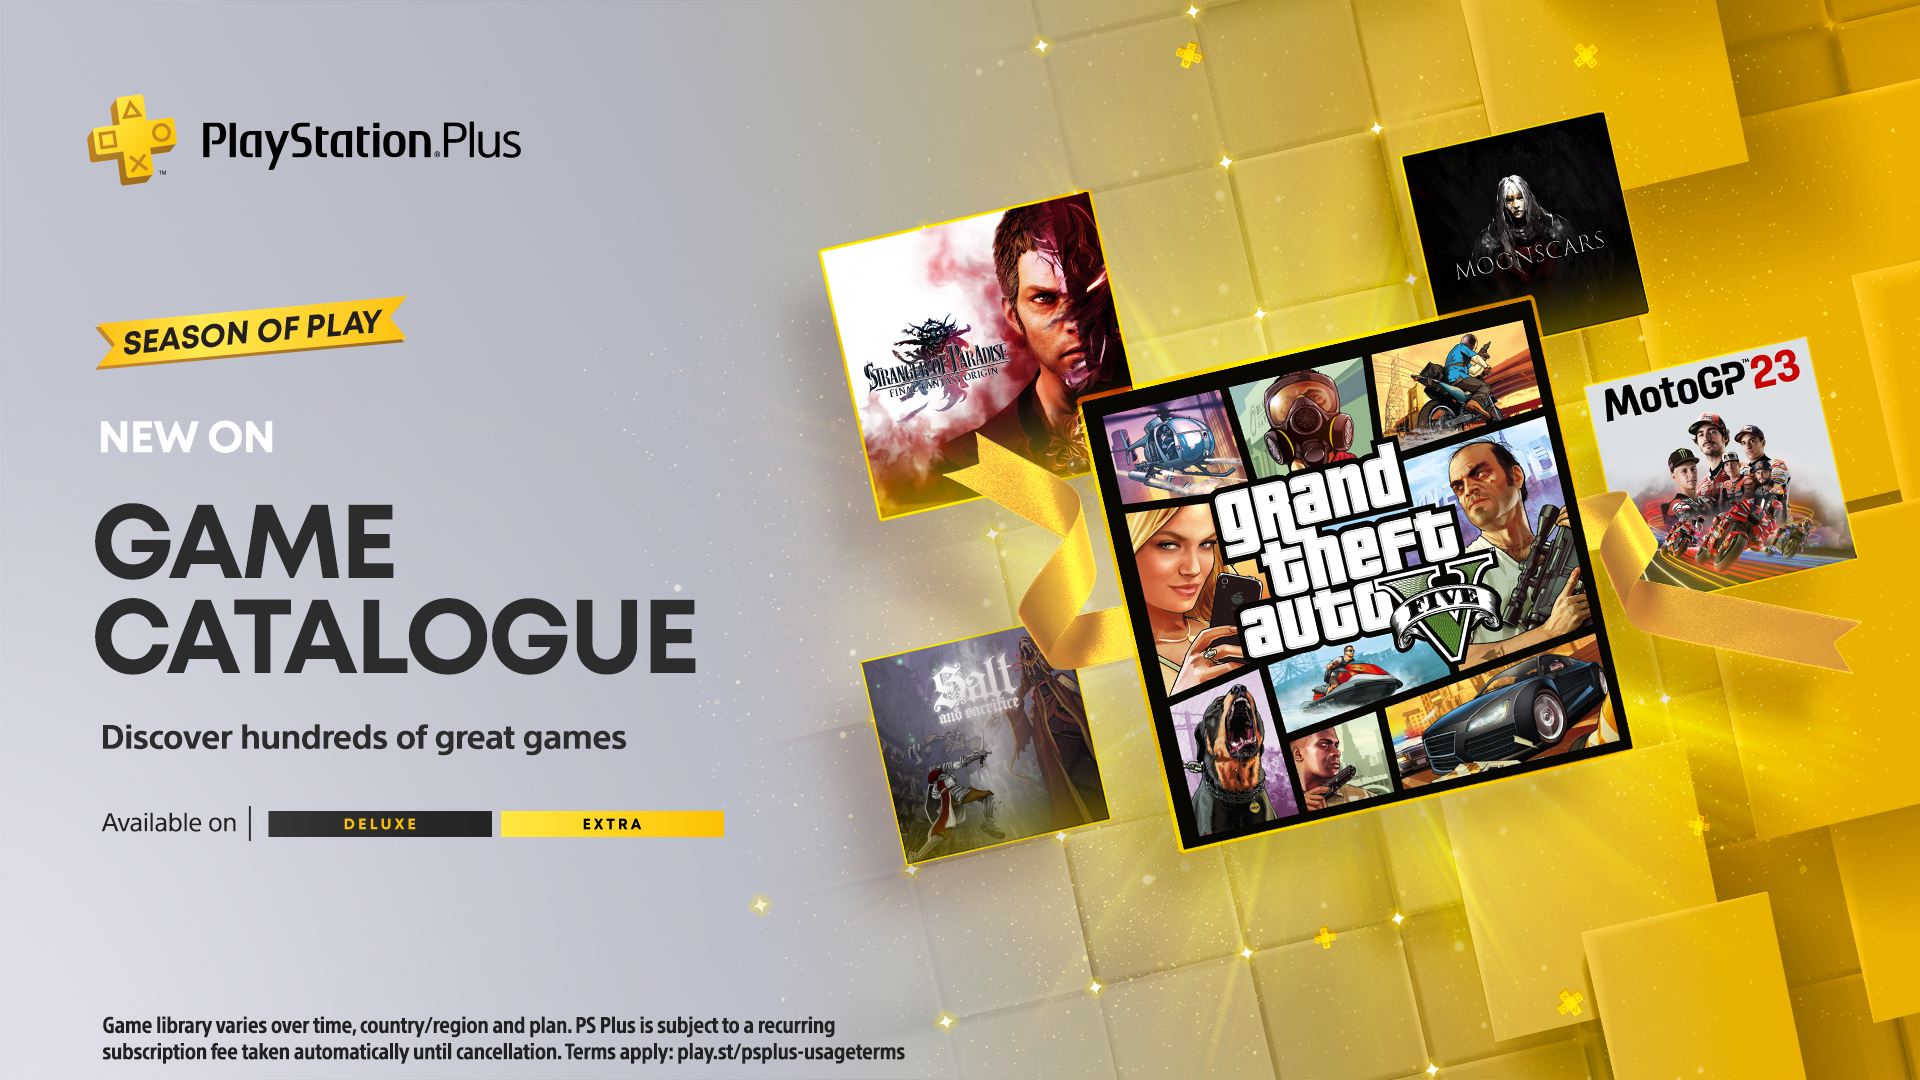 The First PlayStation Plus Extra/Deluxe Game For August Has Been Revealed